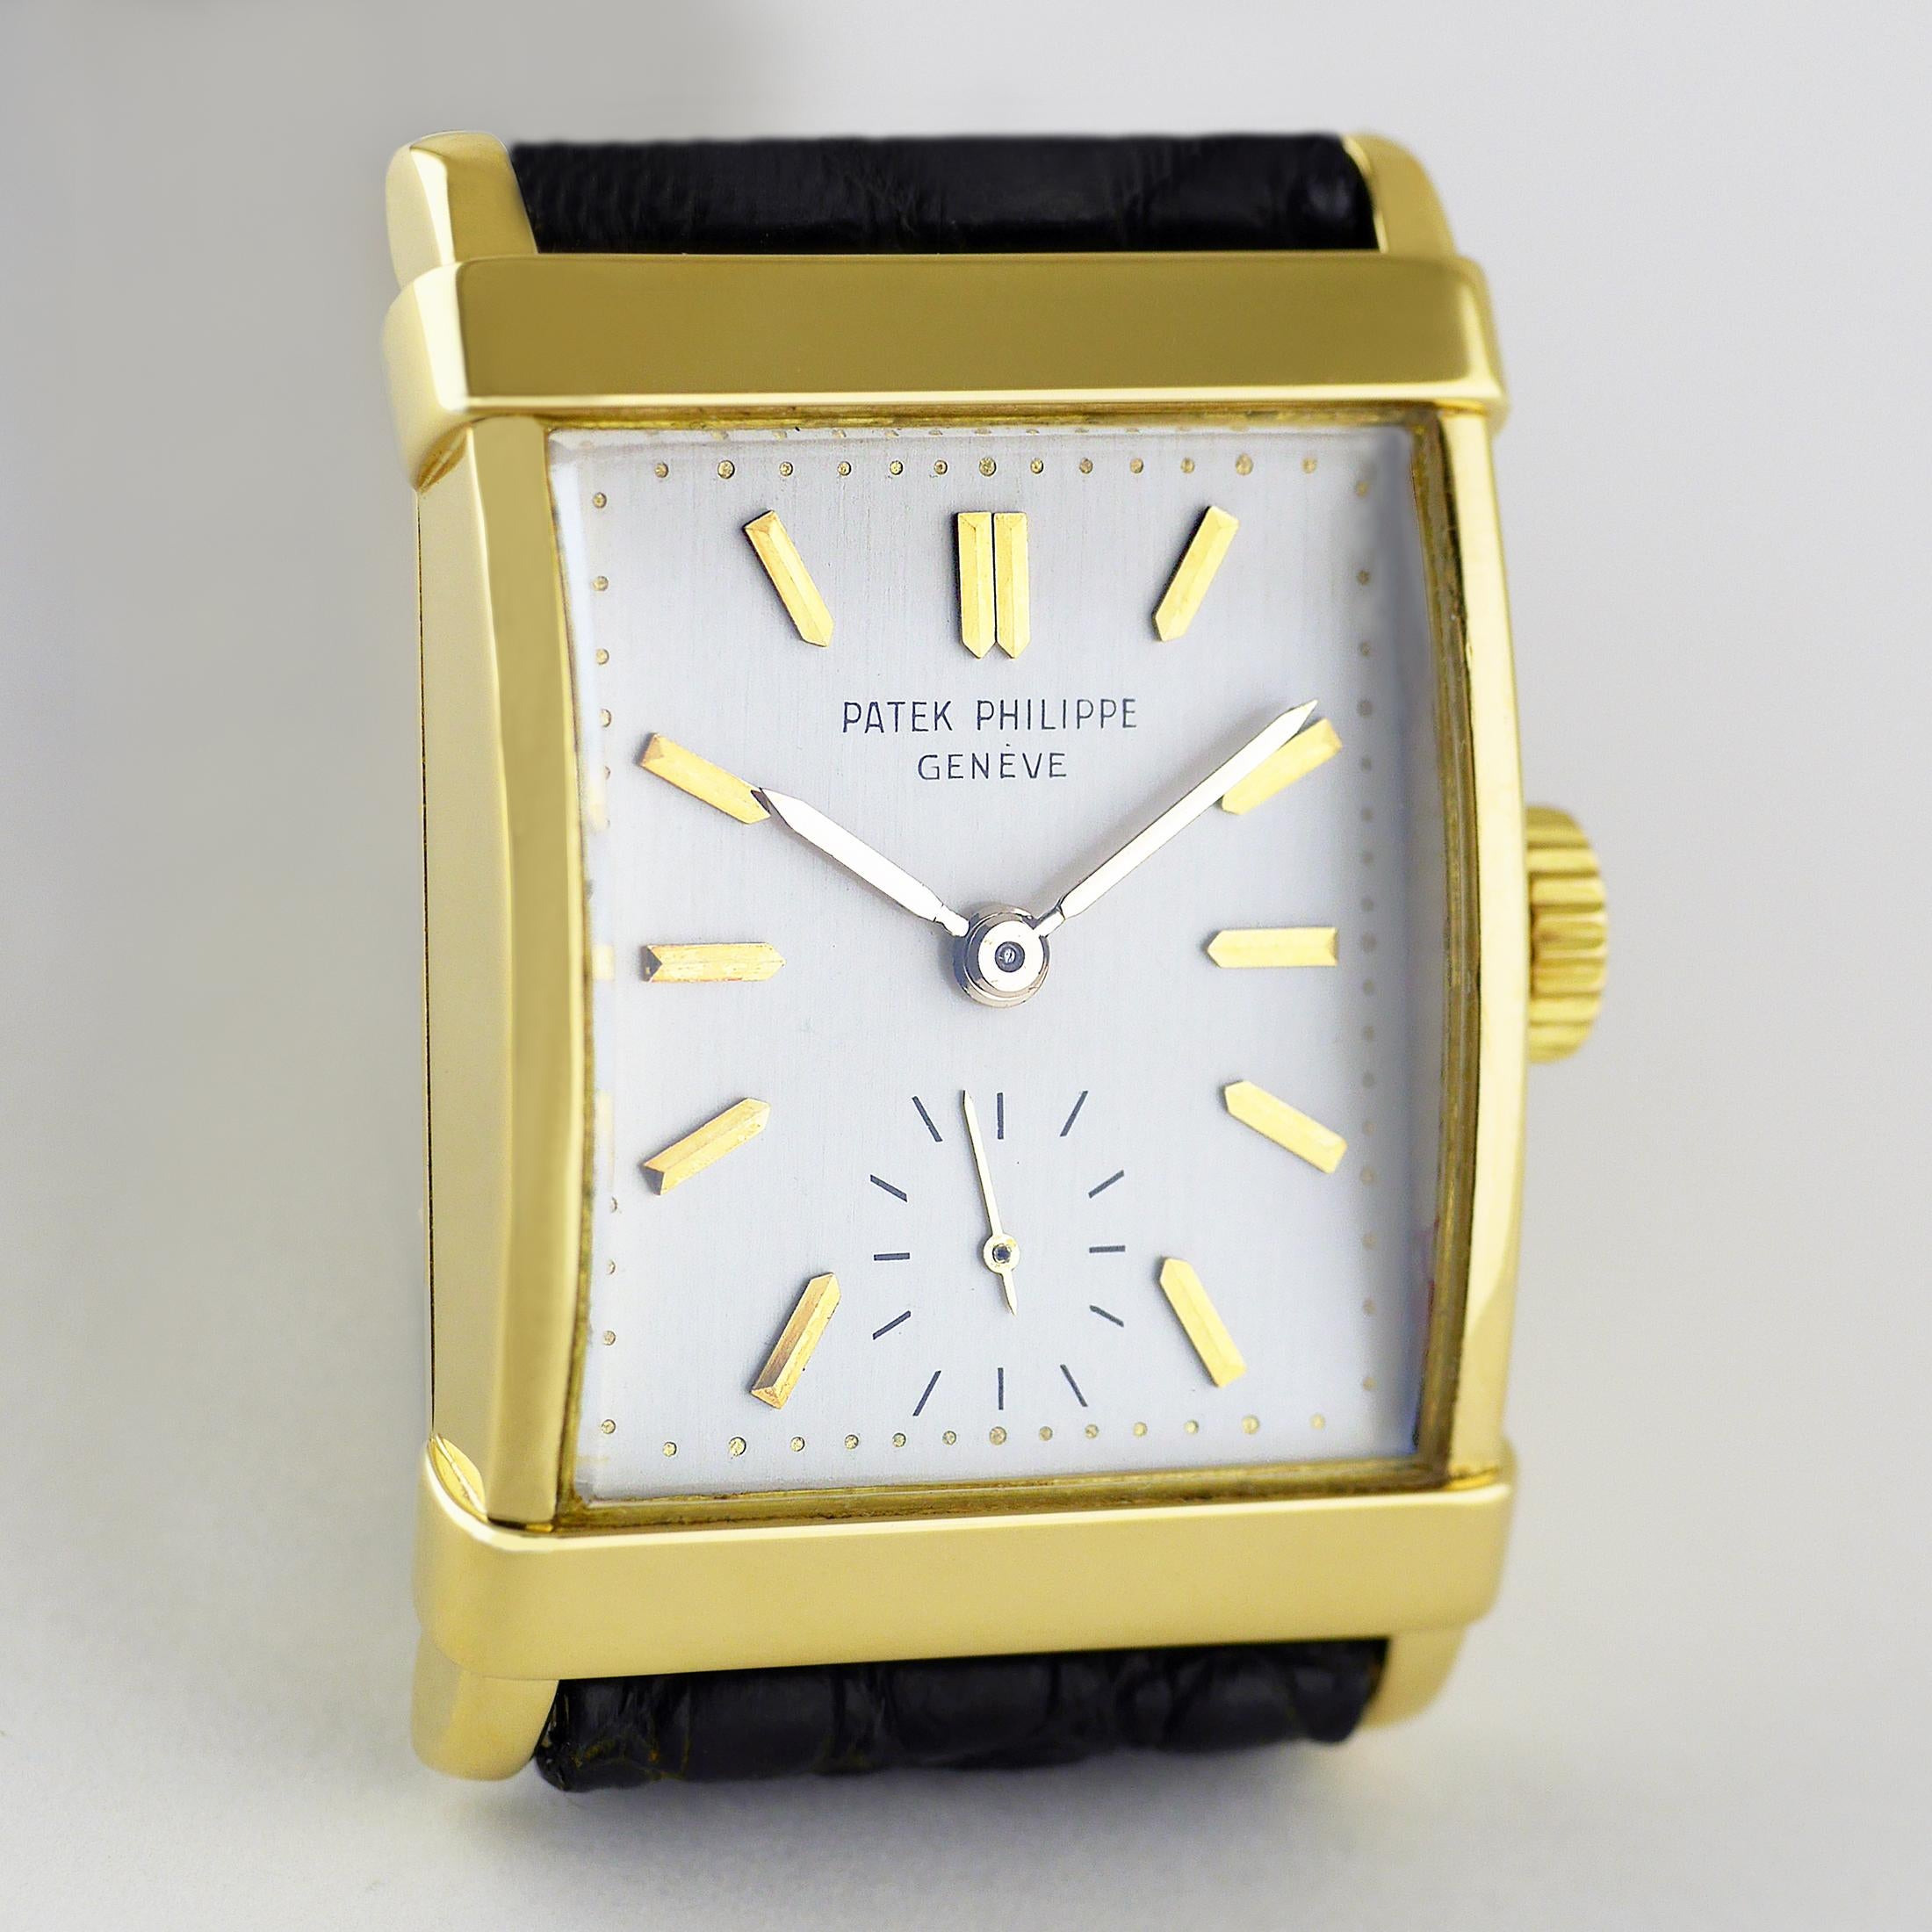 An elegant, fine and rare vintage wristwatch by Patek Philippe made in 1964.

The 18 carat rectangular shaped case in yellow gold with overlaid stepped band to the top and lower bezel and tapered lugs.

Jewelled, 9’’’90 calibre manual movement. 18